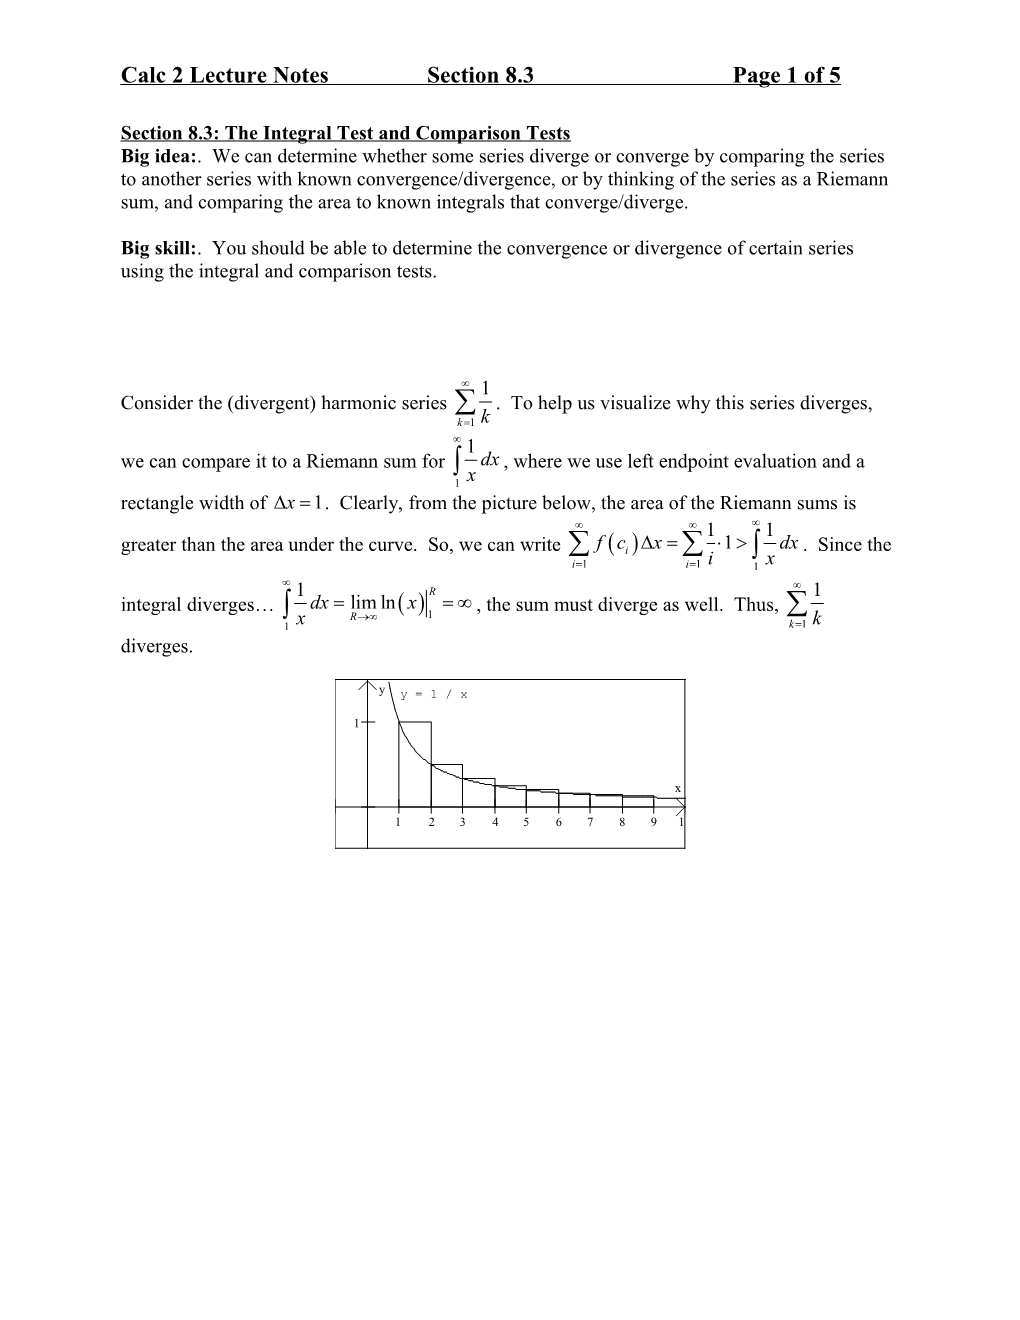 Calculus 2 Lecture Notes, Section 8.3